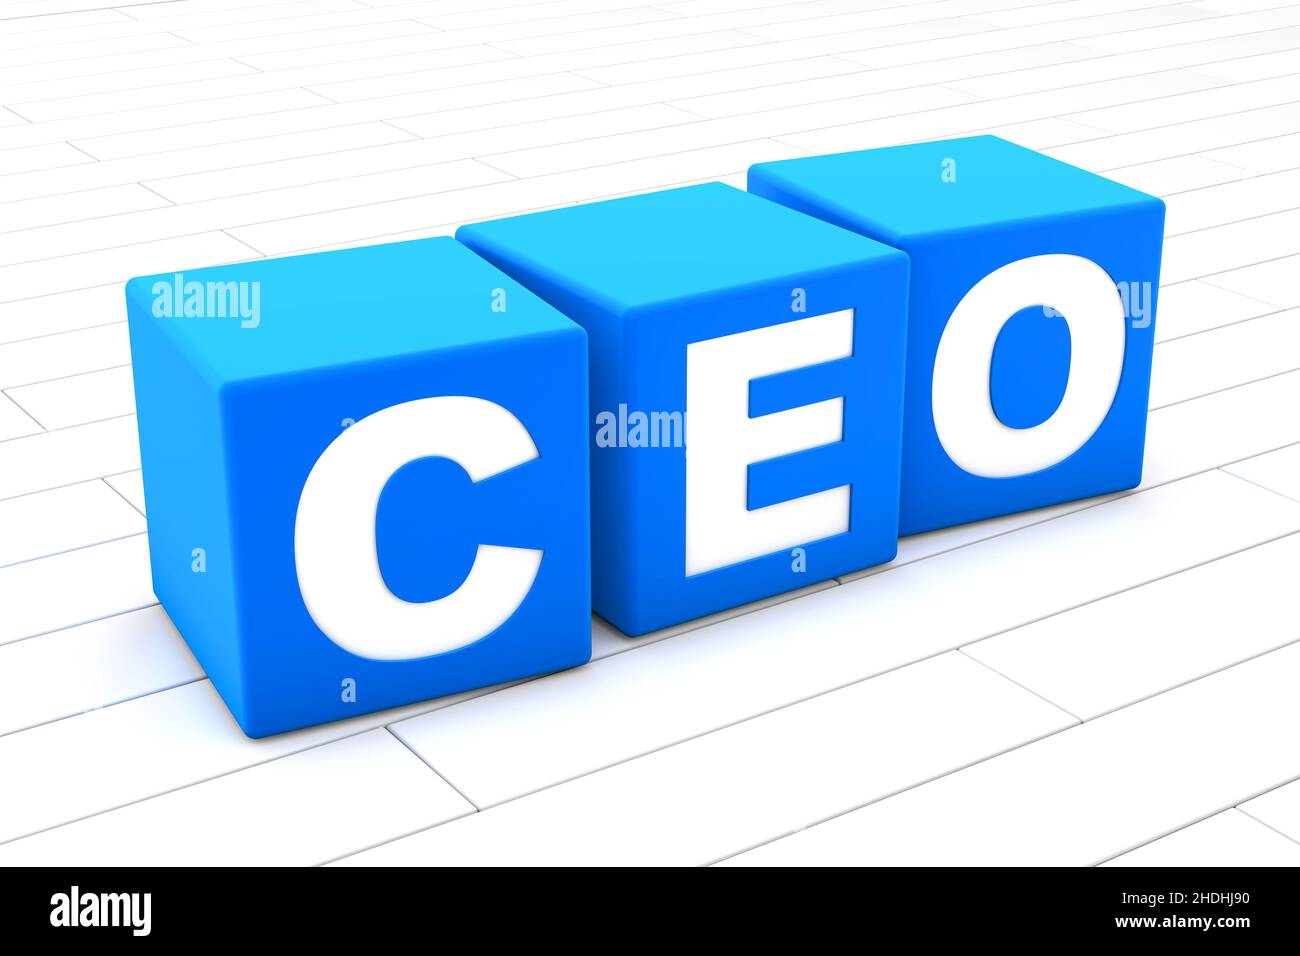 ceo, chief executive officer Foto Stock